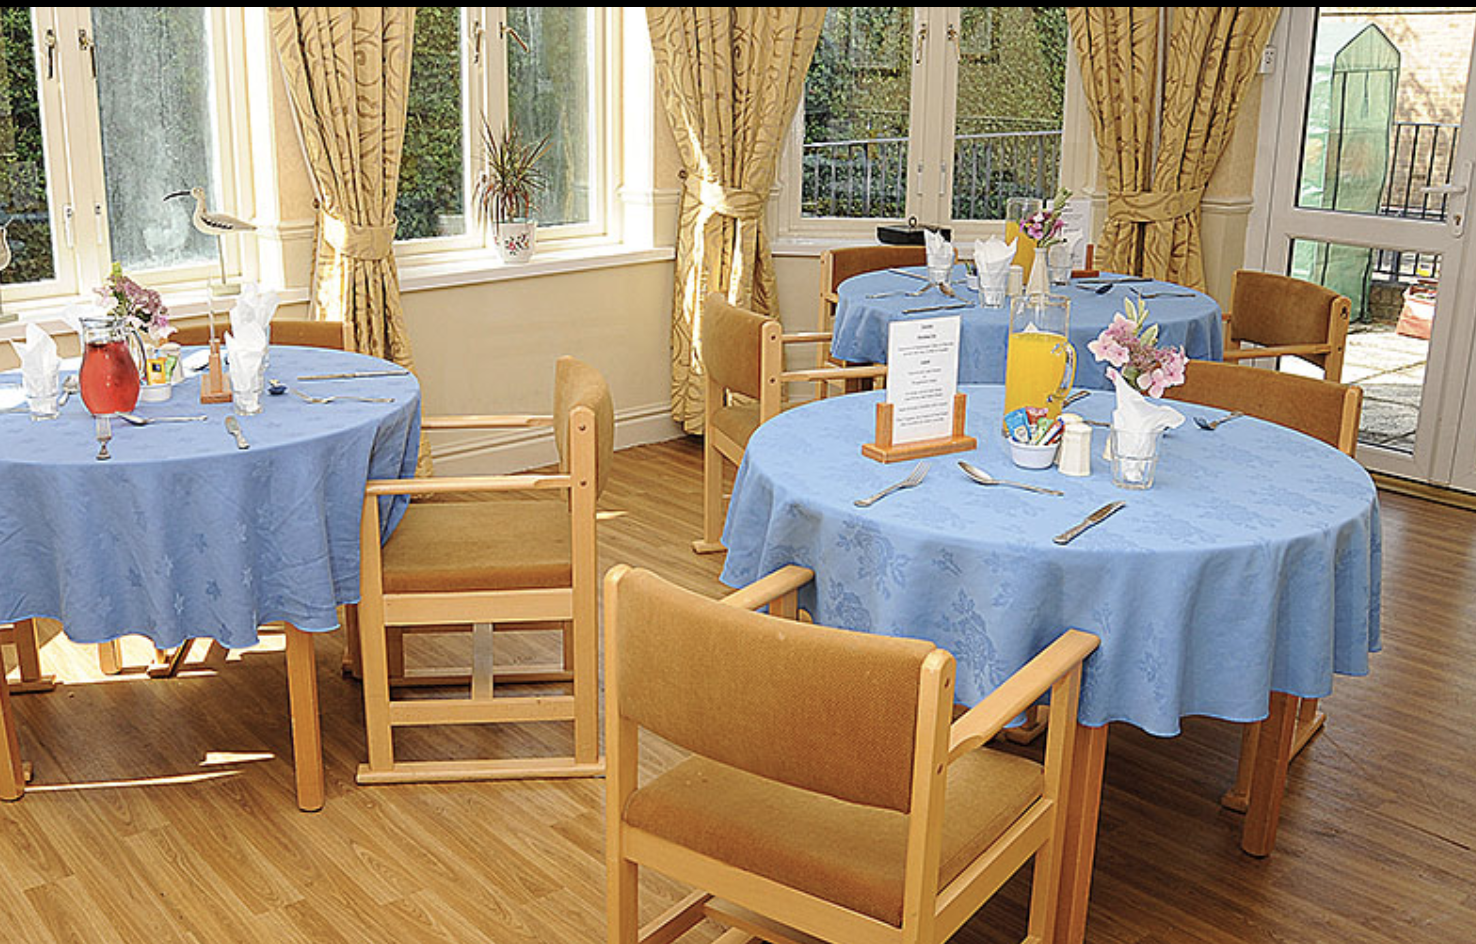 Dining room of Lynton Hall care home in New Malden, London